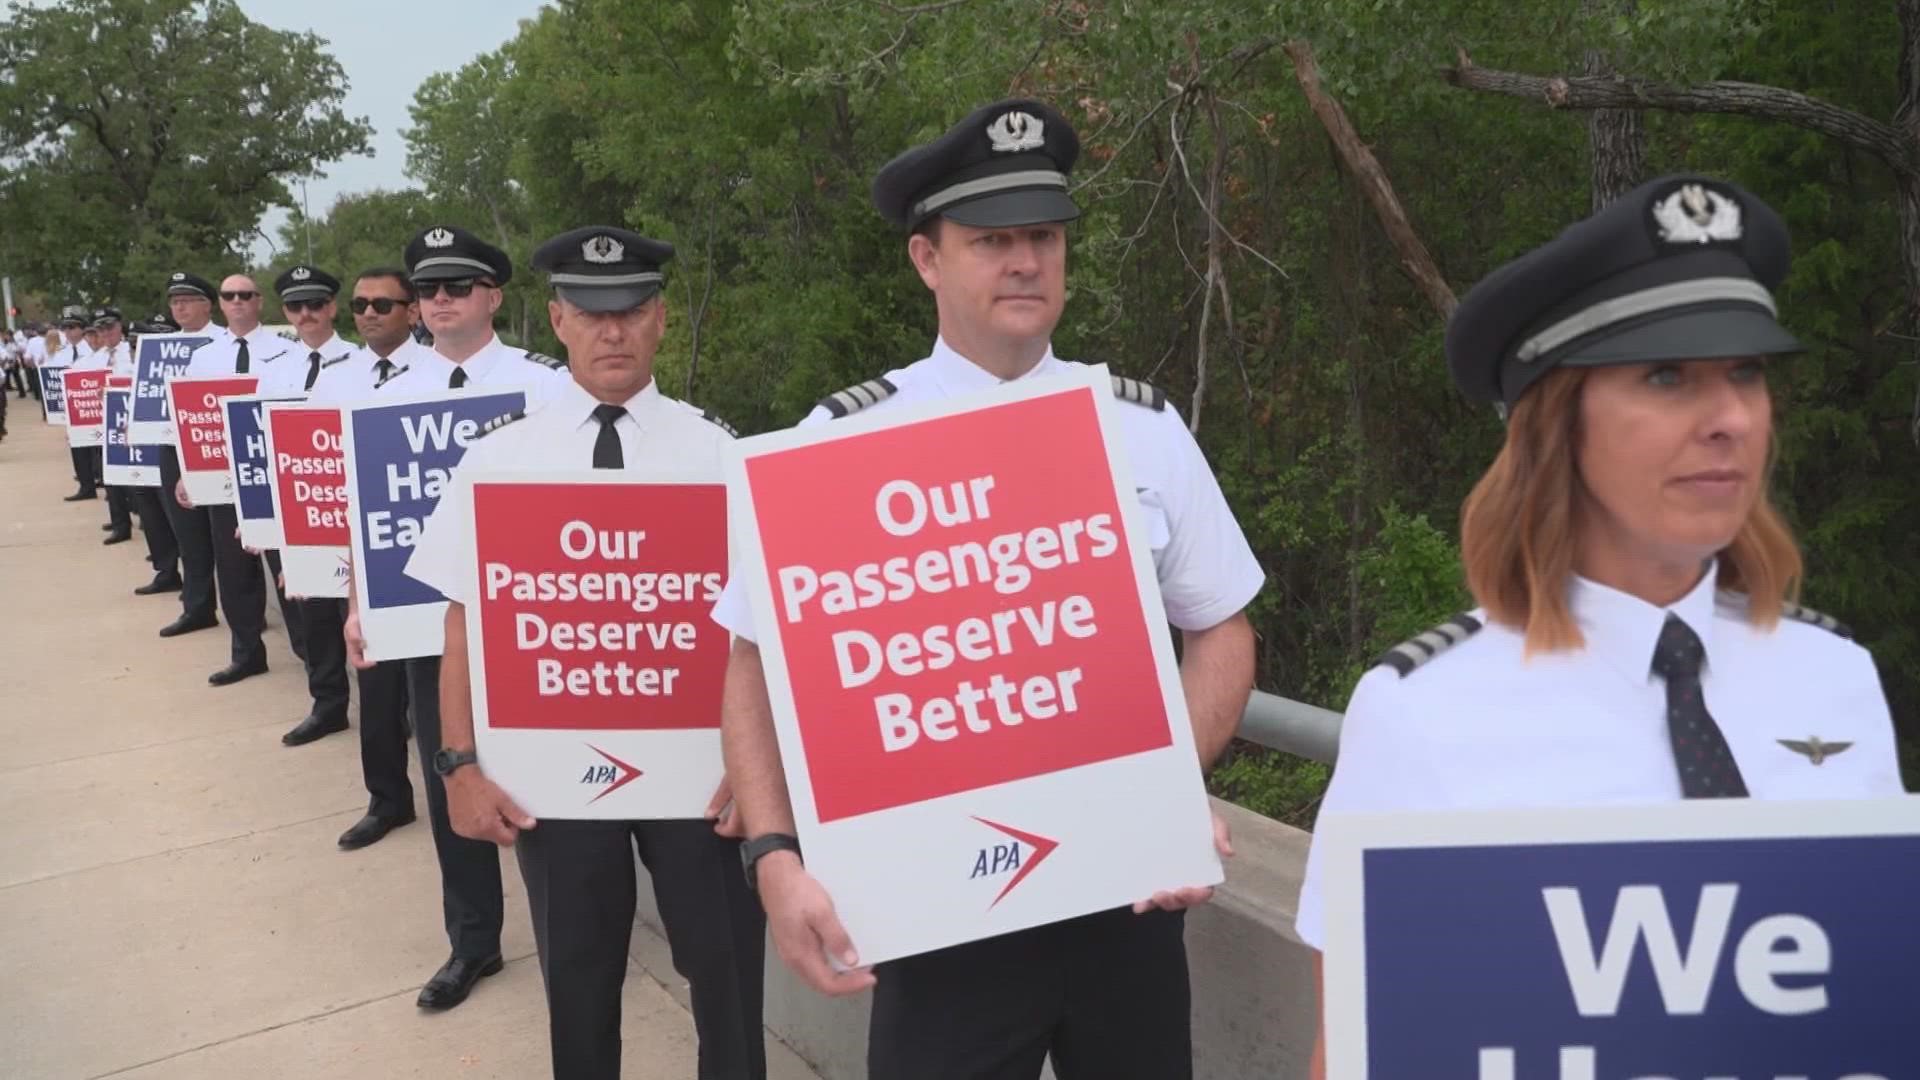 The union hopes this demonstration will put some pressure on American Airlines to revise their schedules, work rules and pay.